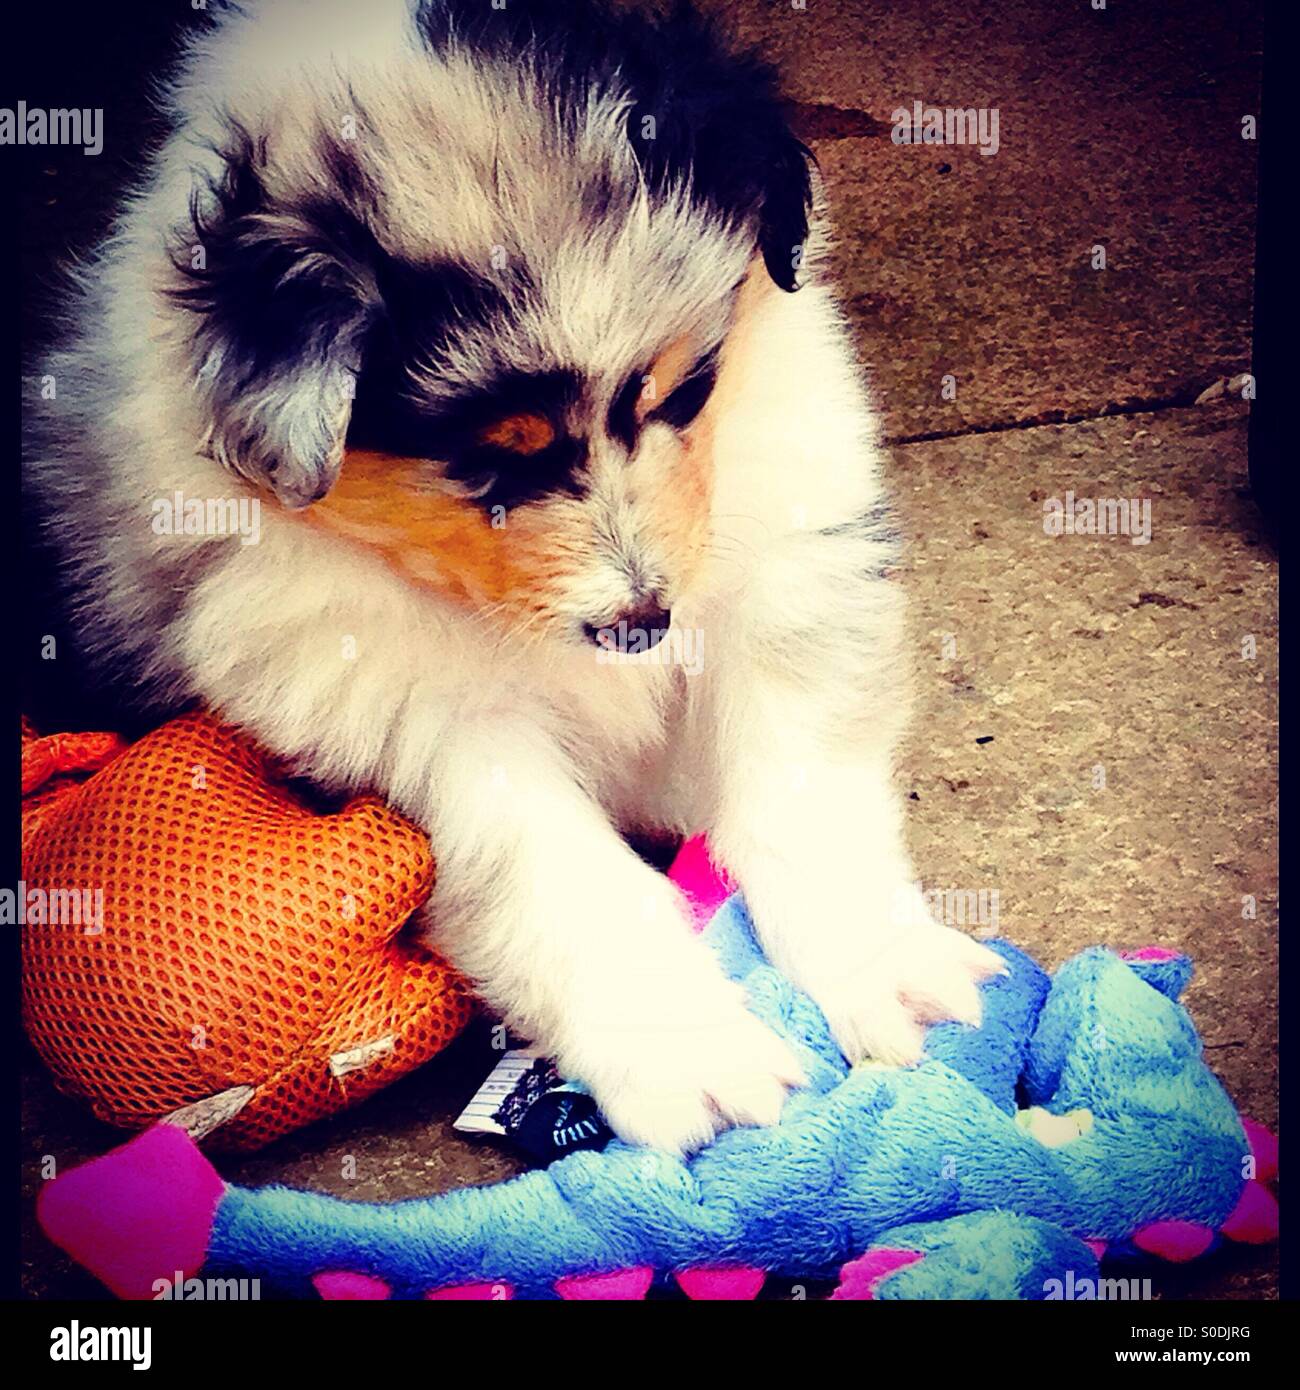 Rough Collie puppy playing with toy dragon. Stock Photo